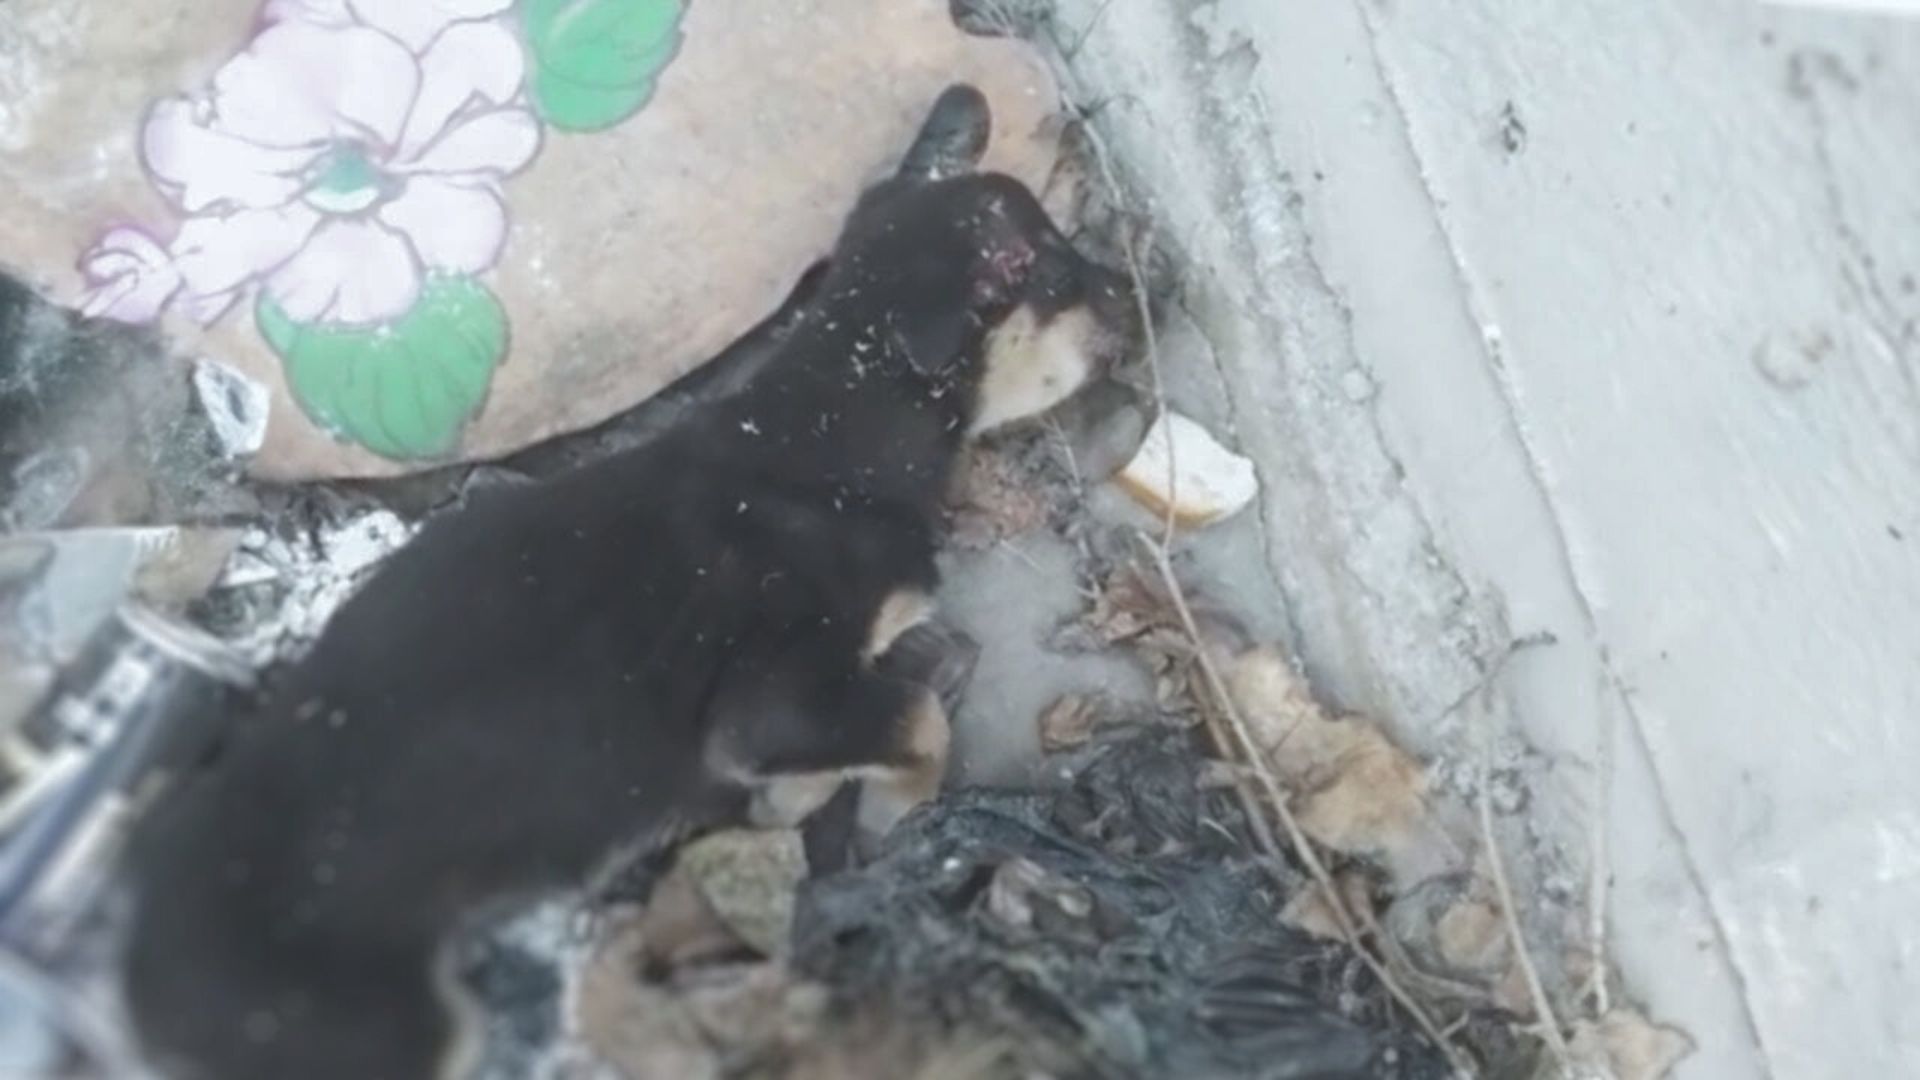 Rescuers Were Shocked To Find An Injured Puppy Near A Trash Can And Made A Difficult Choice